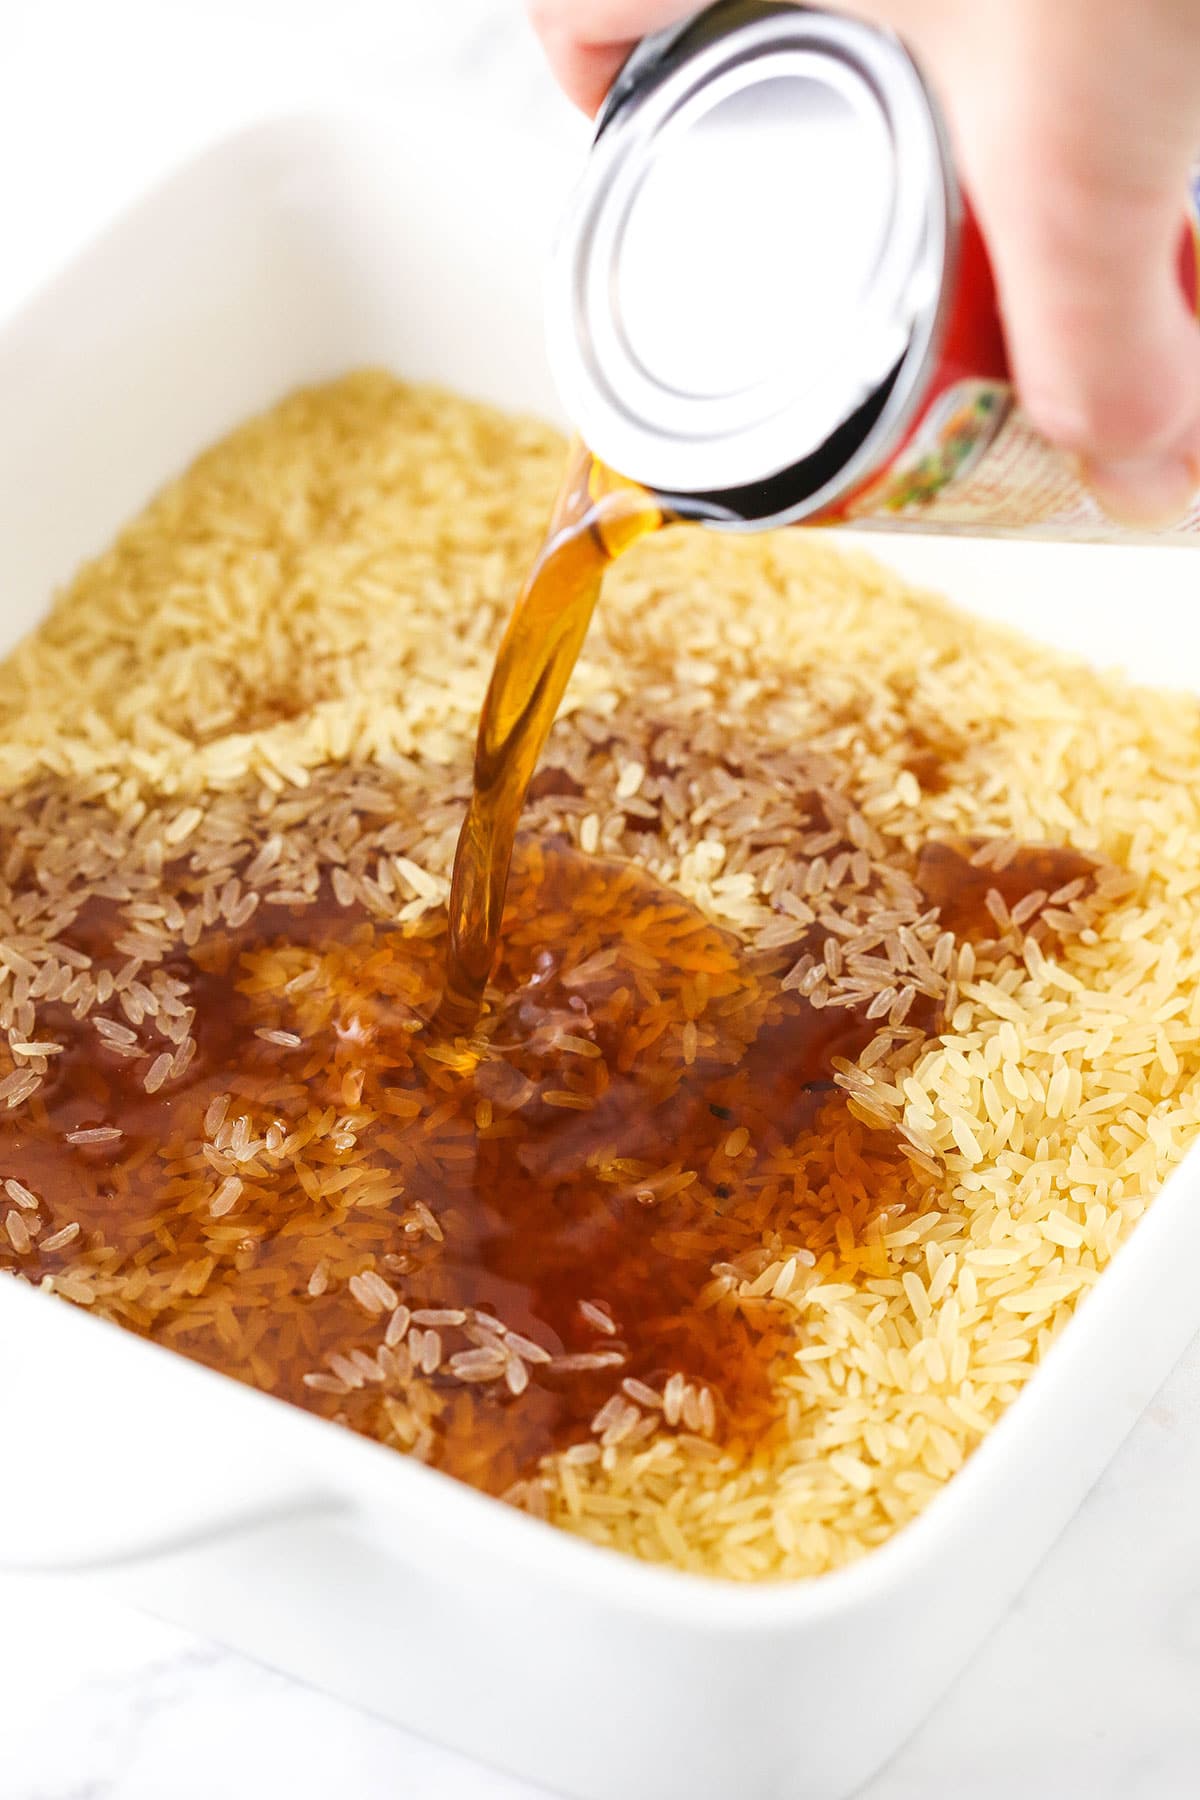 A can of condensed soup being poured into a baking dish full of long-grain rice